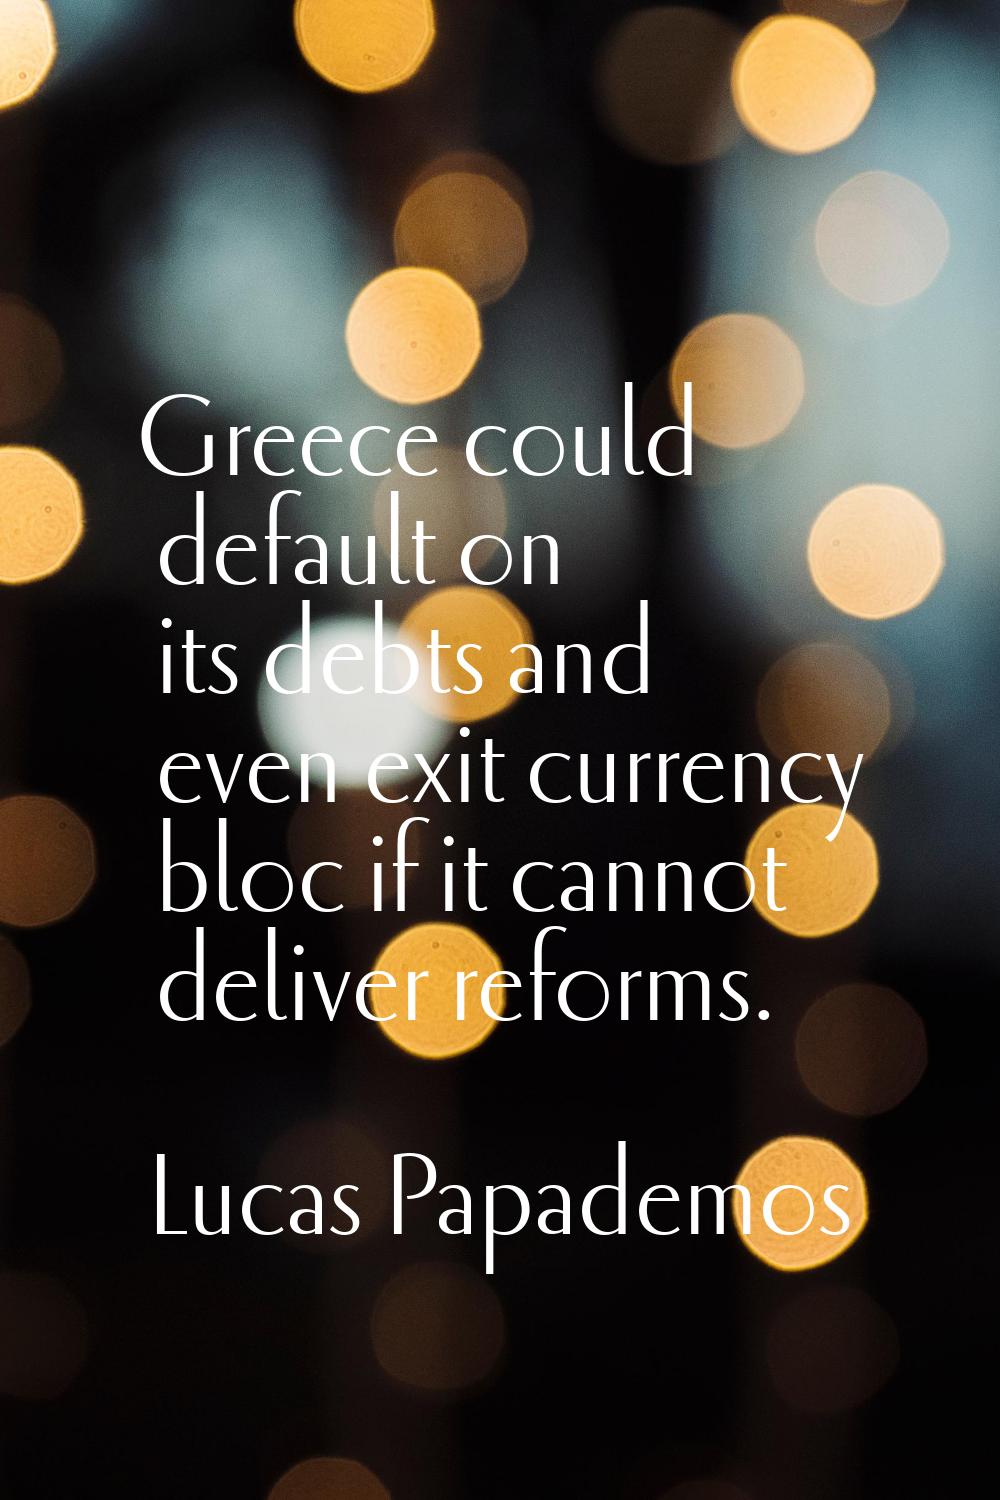 Greece could default on its debts and even exit currency bloc if it cannot deliver reforms.